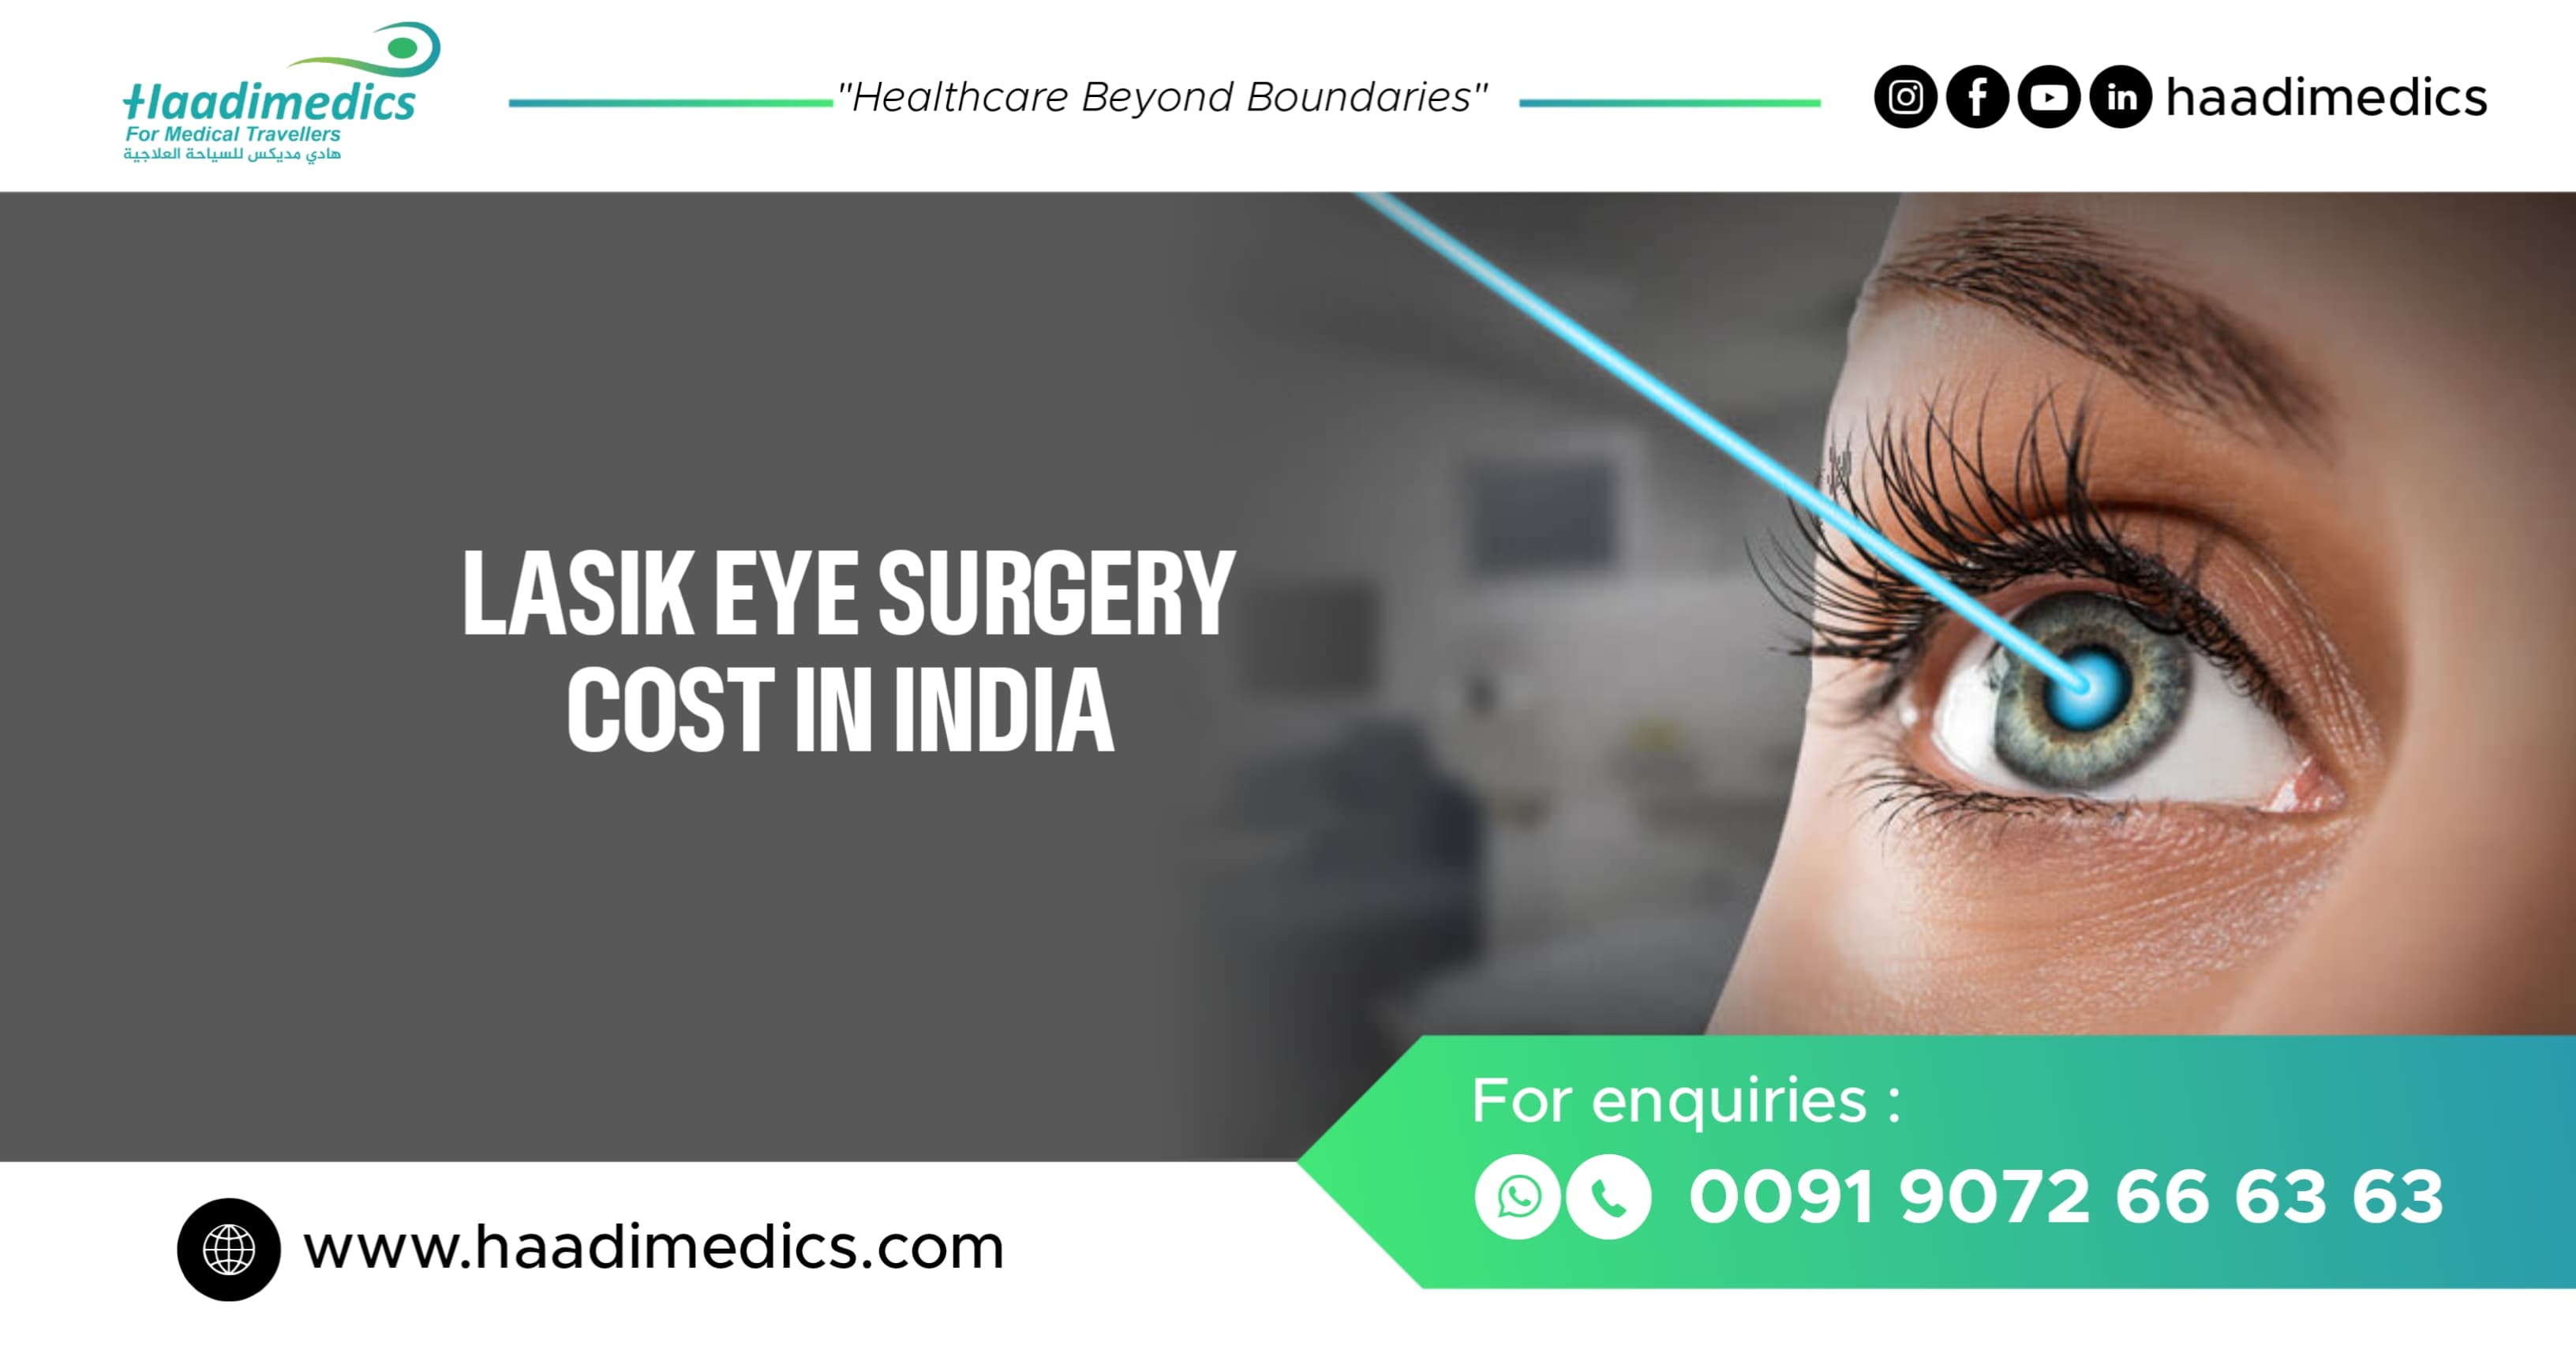 LASIK Eye Surgery Cost in India